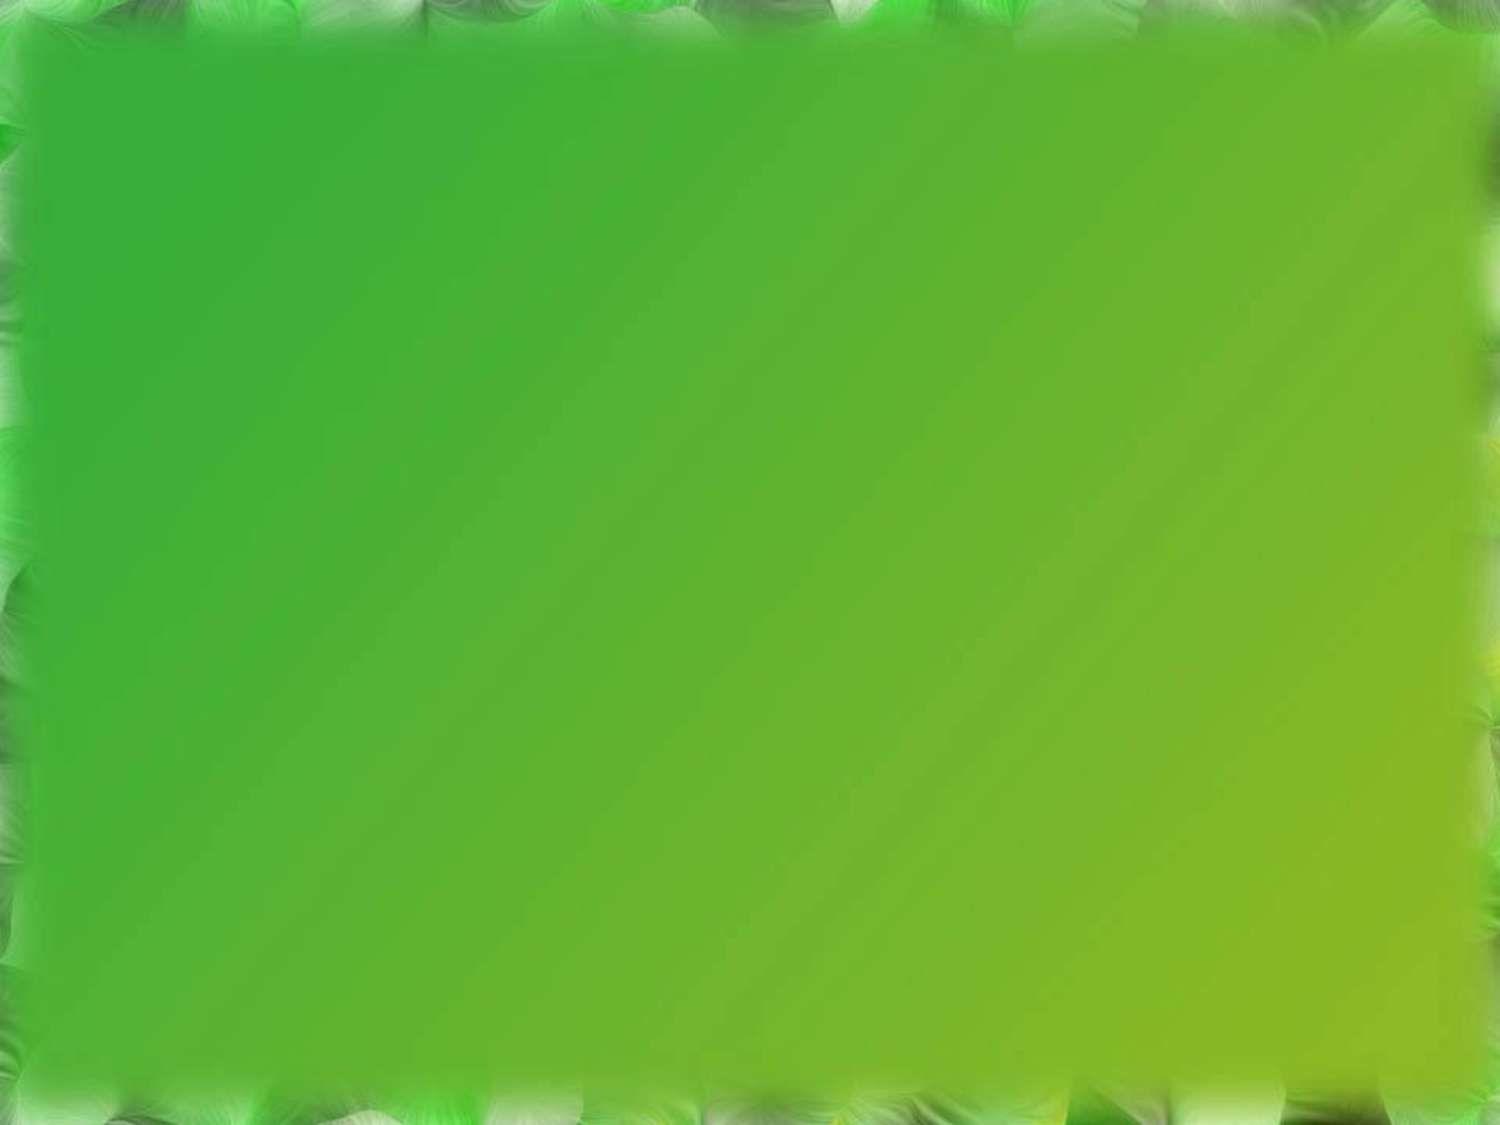 Green Art Border Free PPT Background for your PowerPoint